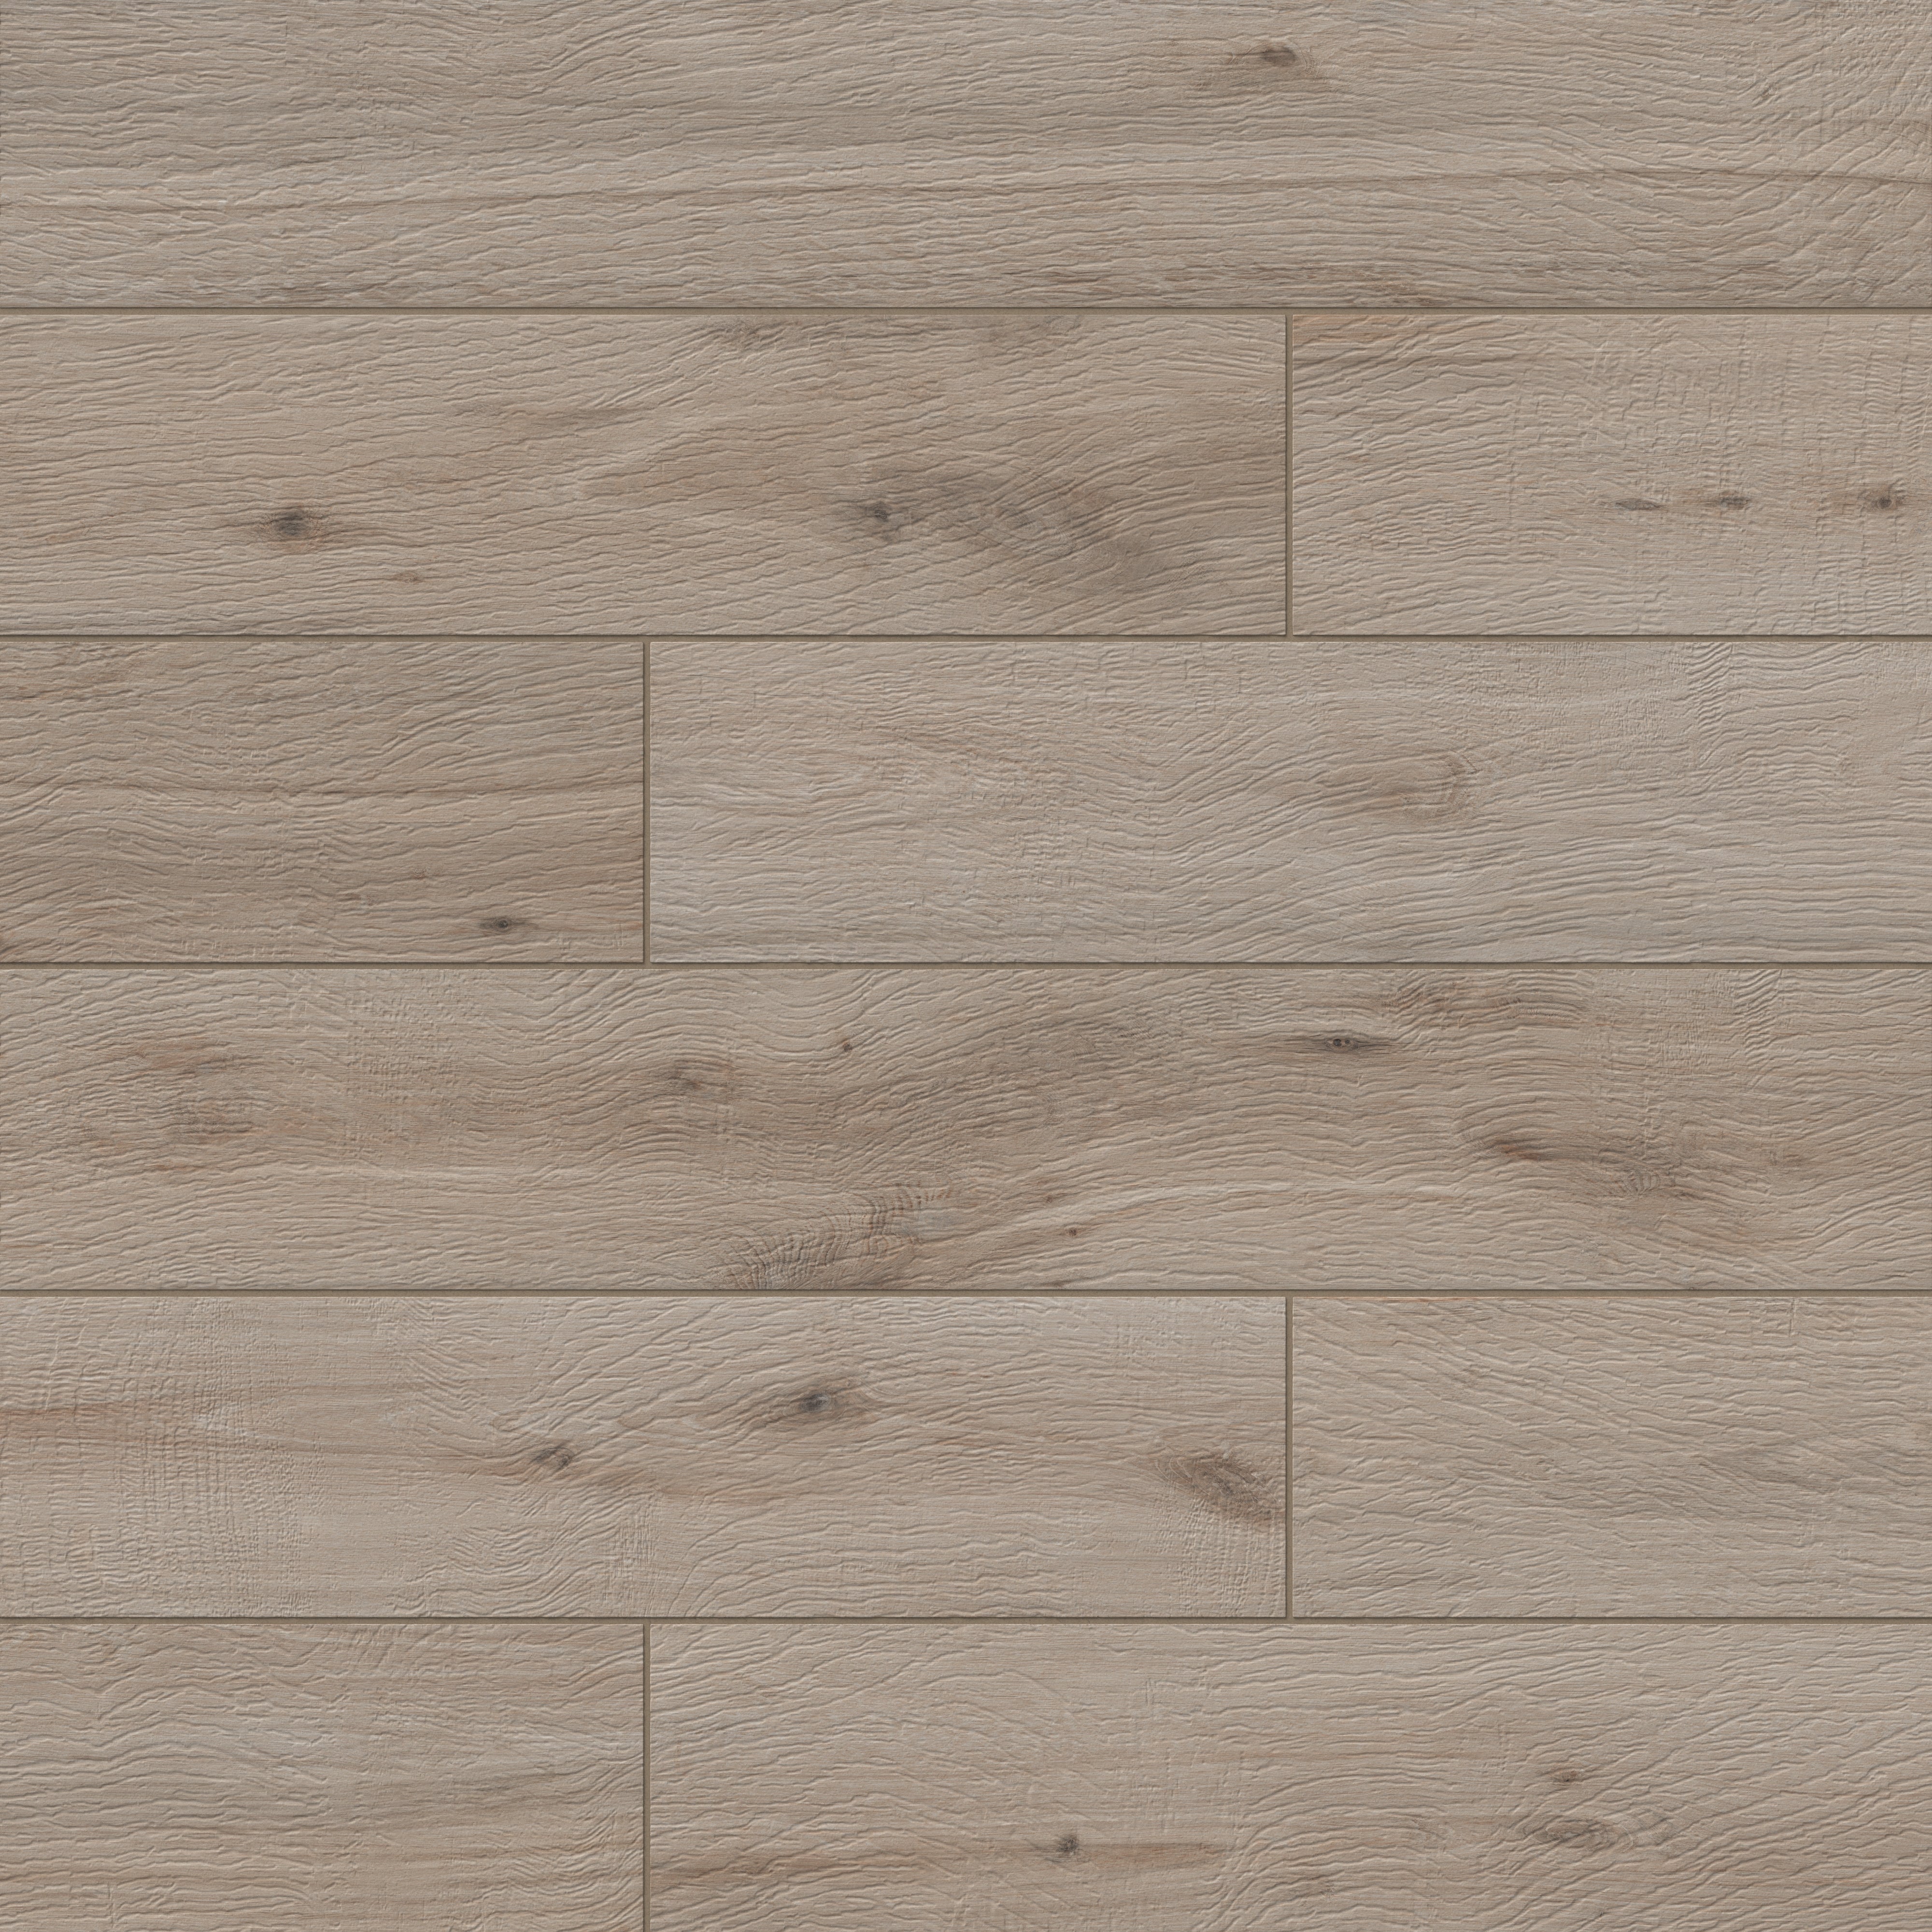 Preston's porcelain plank in White Oak shade, revealing the subtle wood textures and organic appeal.